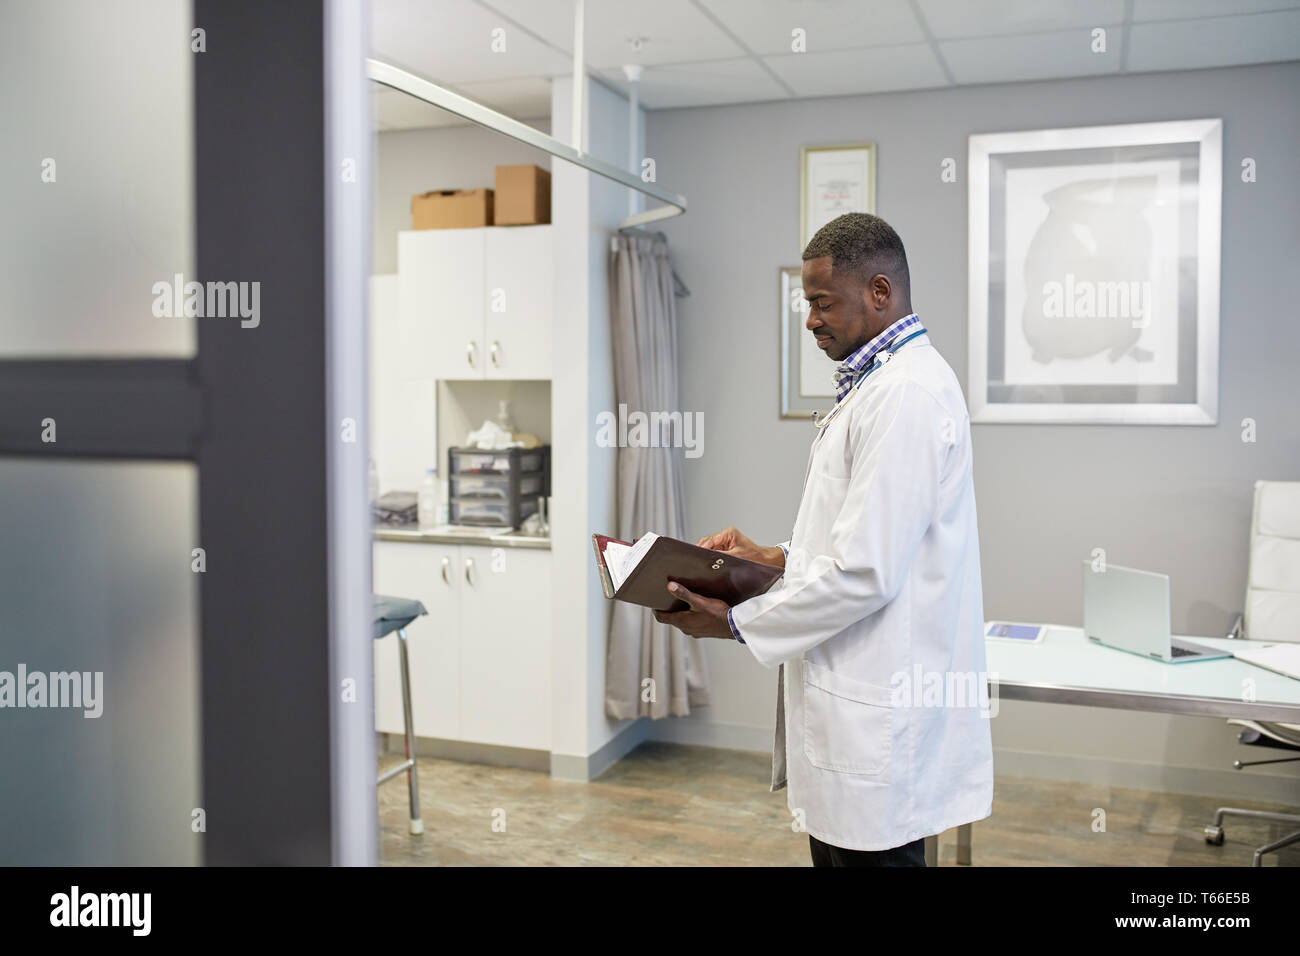 Male doctor checking schedule in clinic doctors office Stock Photo